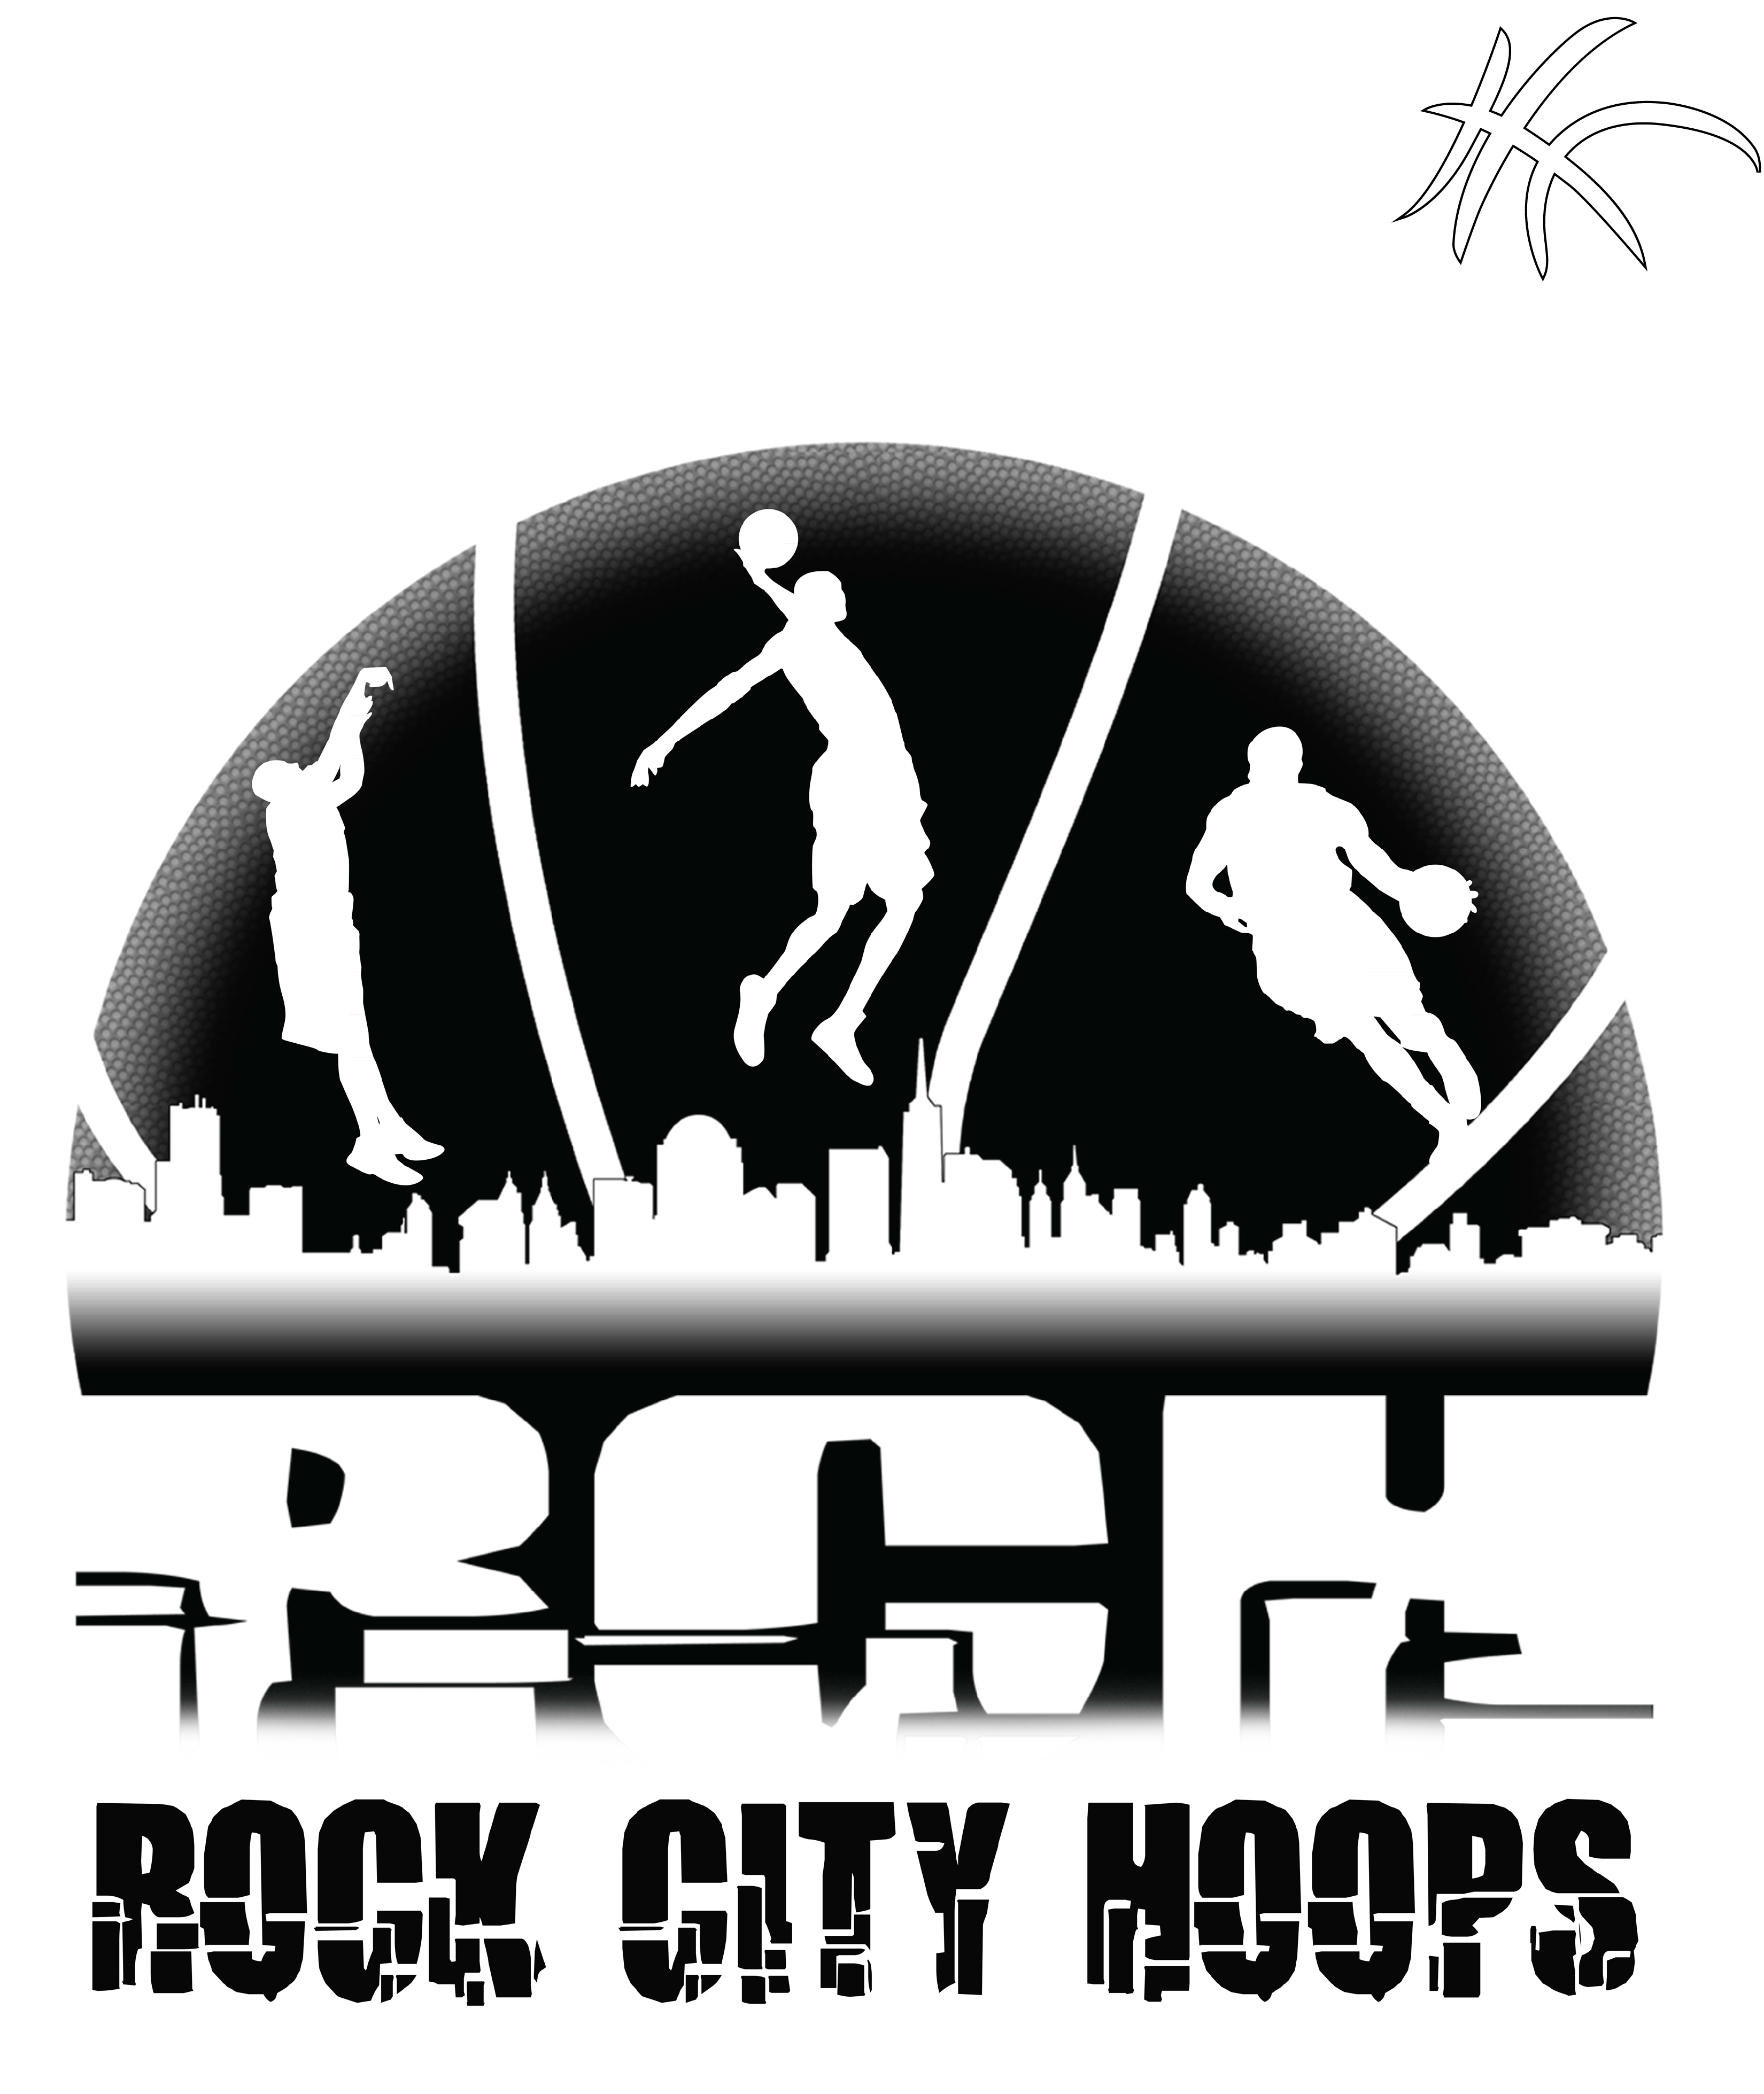 Rock City Hoops! Where The Elite Play!